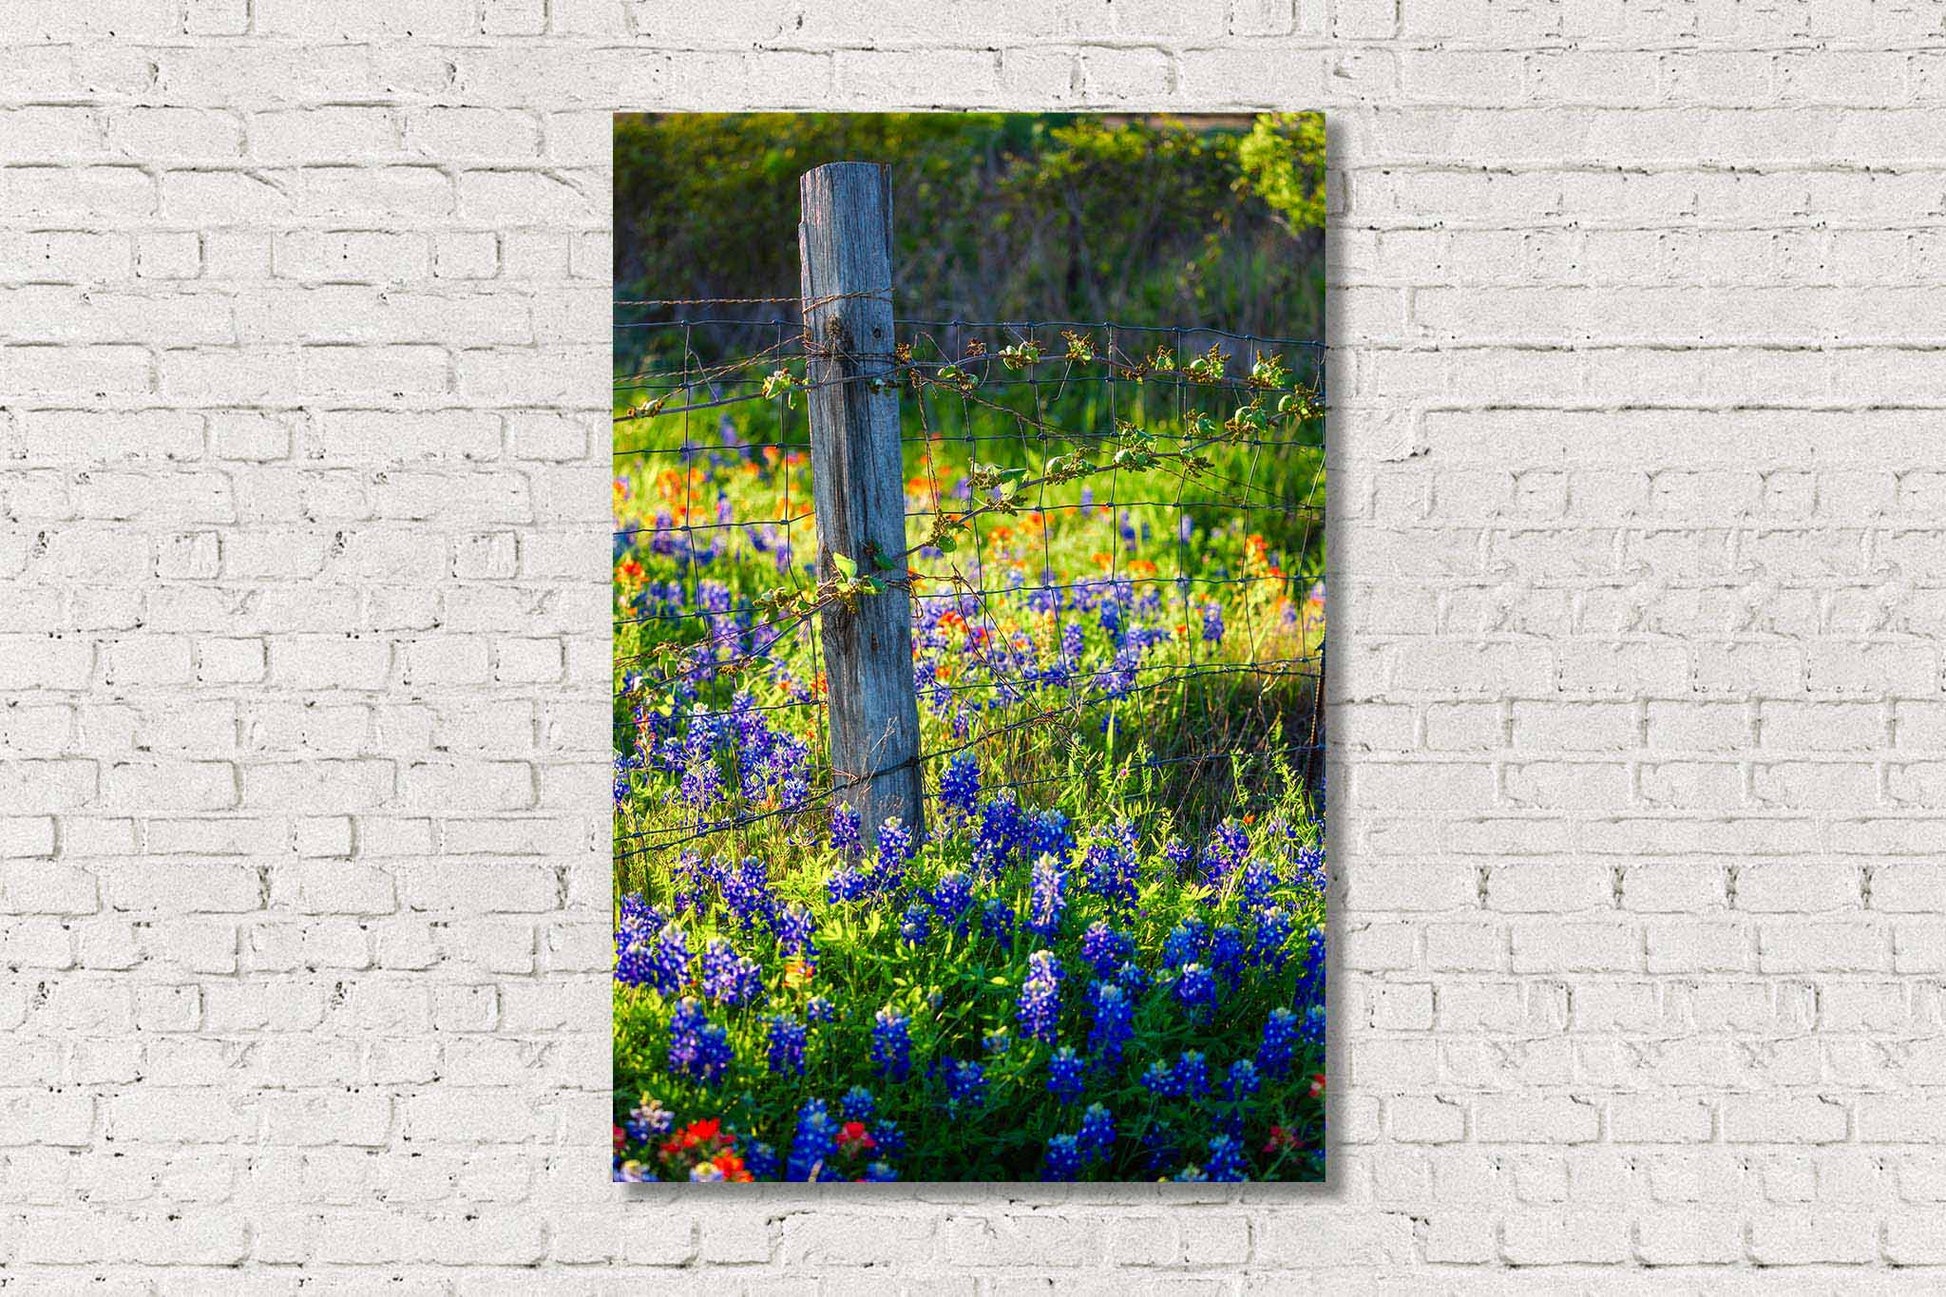 Vertical farmhouse metal print on aluminum of a fence post surrounded by bluebonnet wildflowers on a spring day in Texas by Sean Ramsey of Southern Plains Photography.